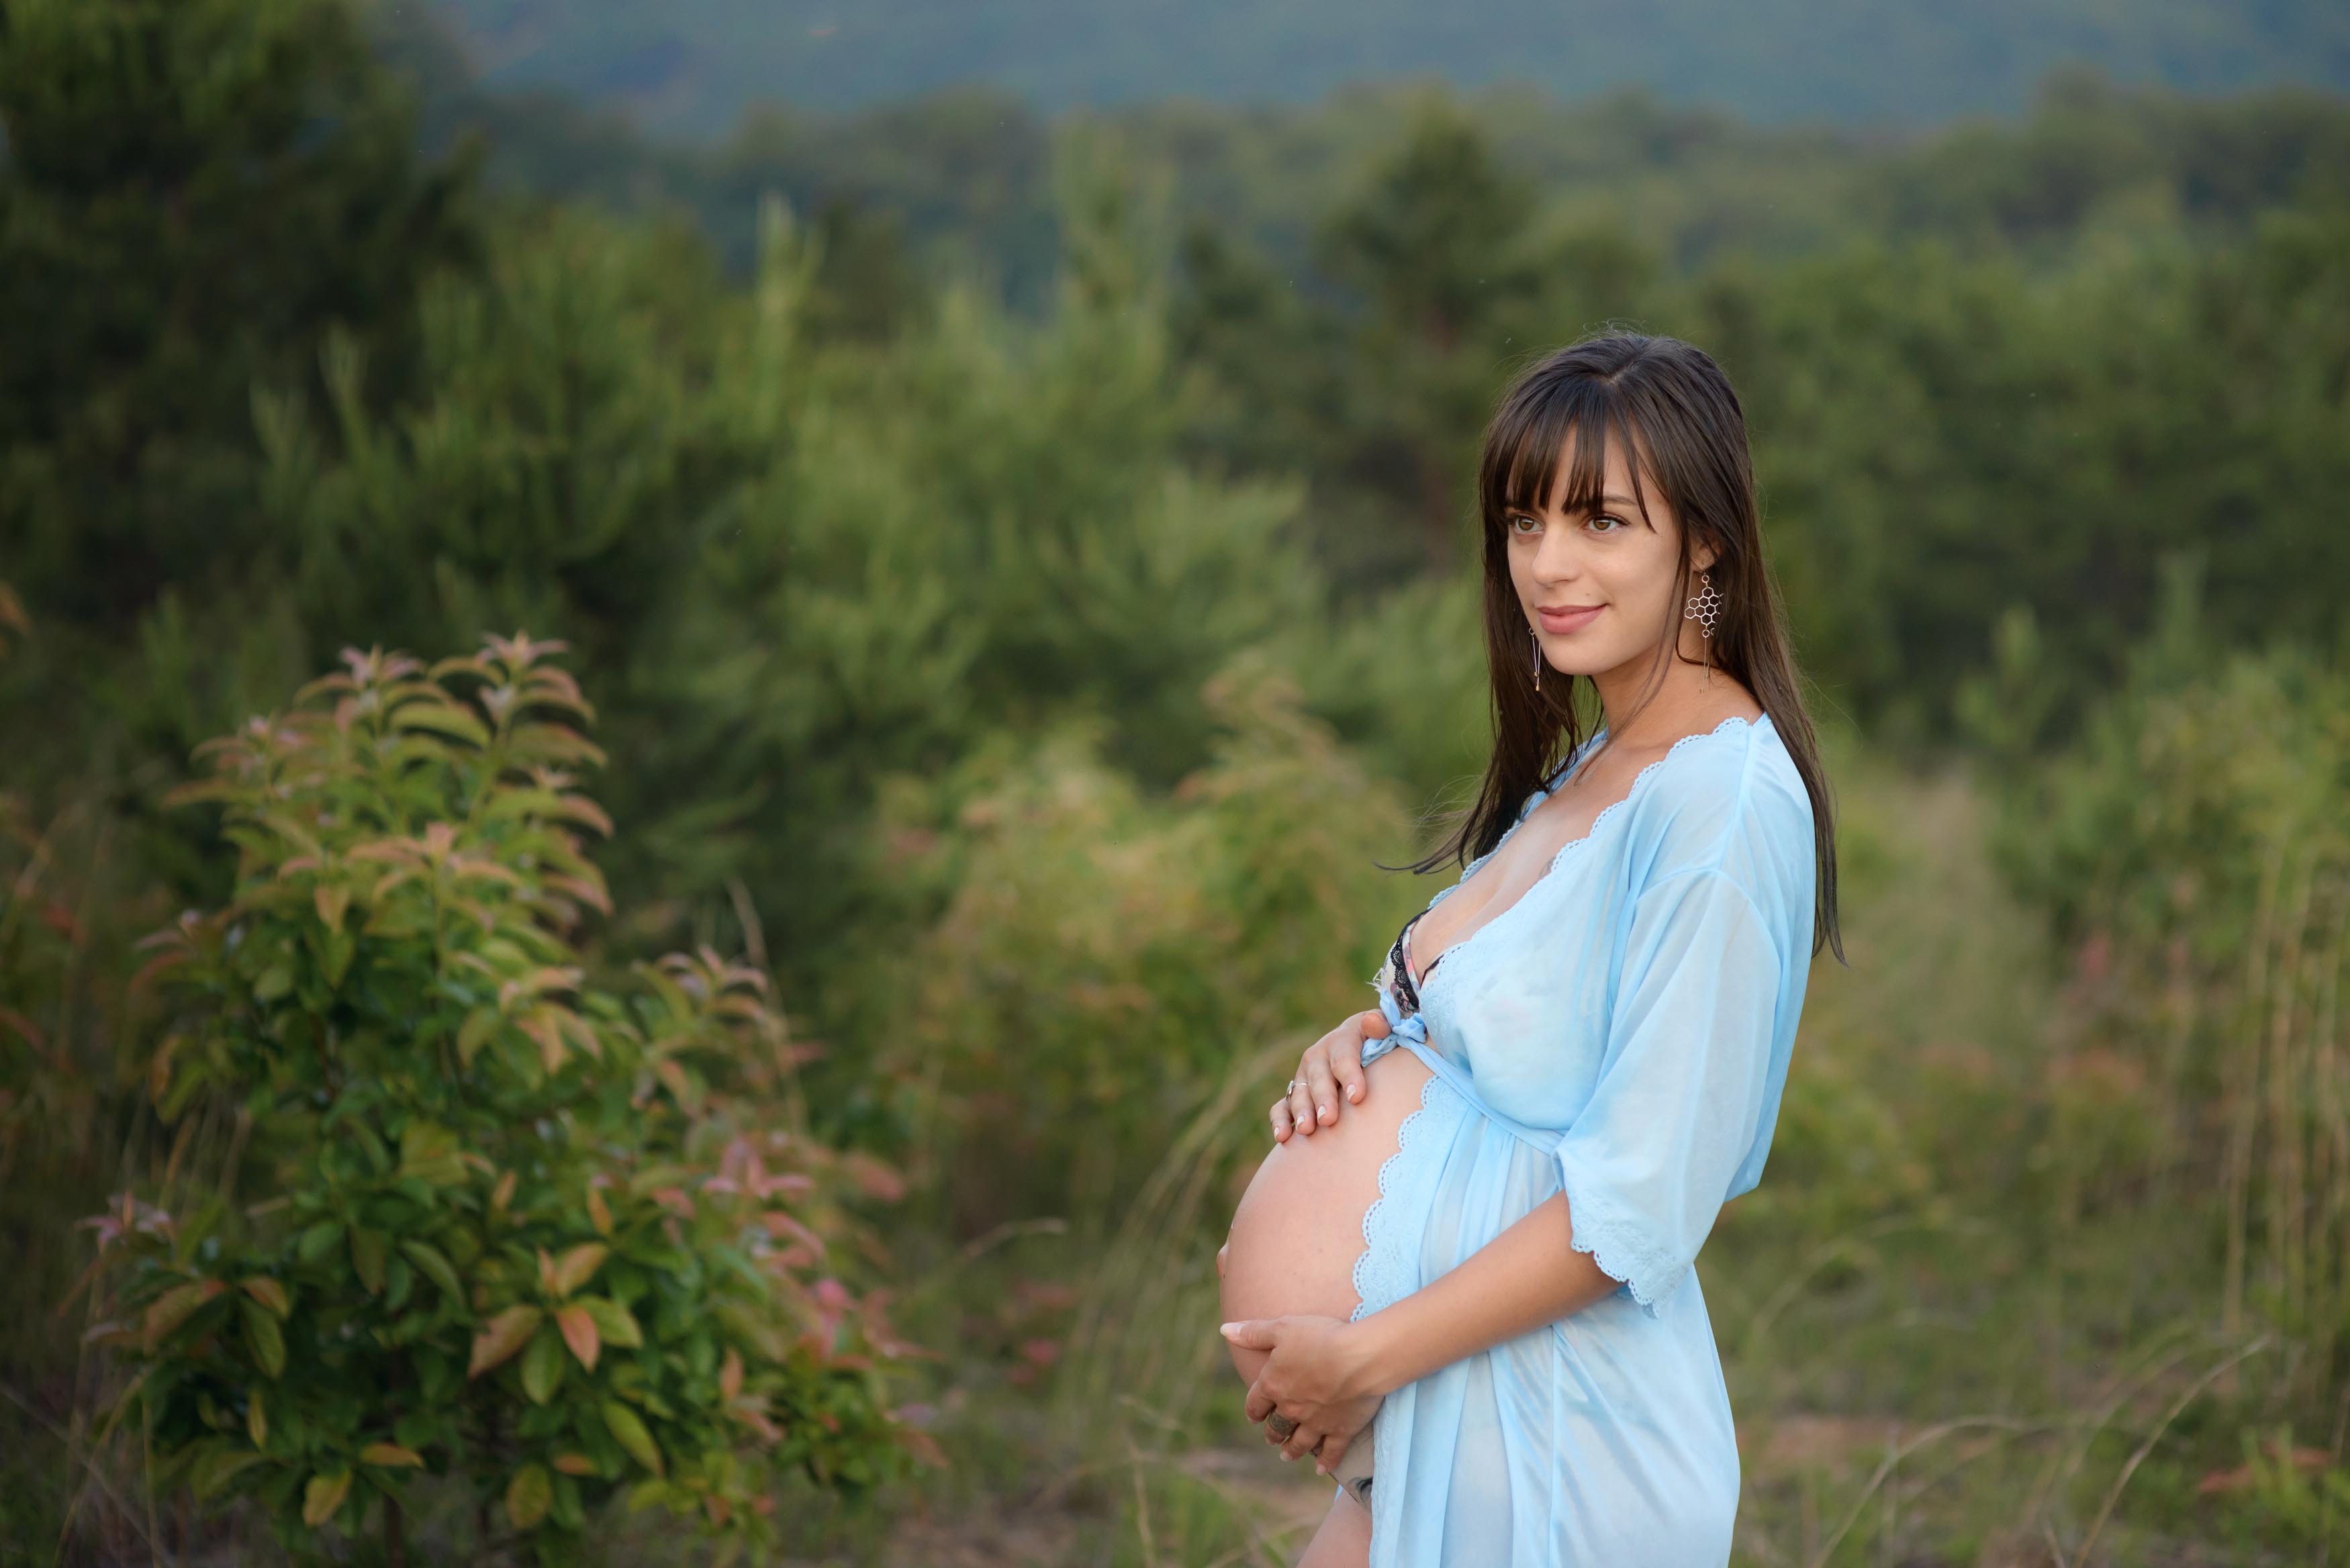 Beautiful outdoor maternity photo with greenery.